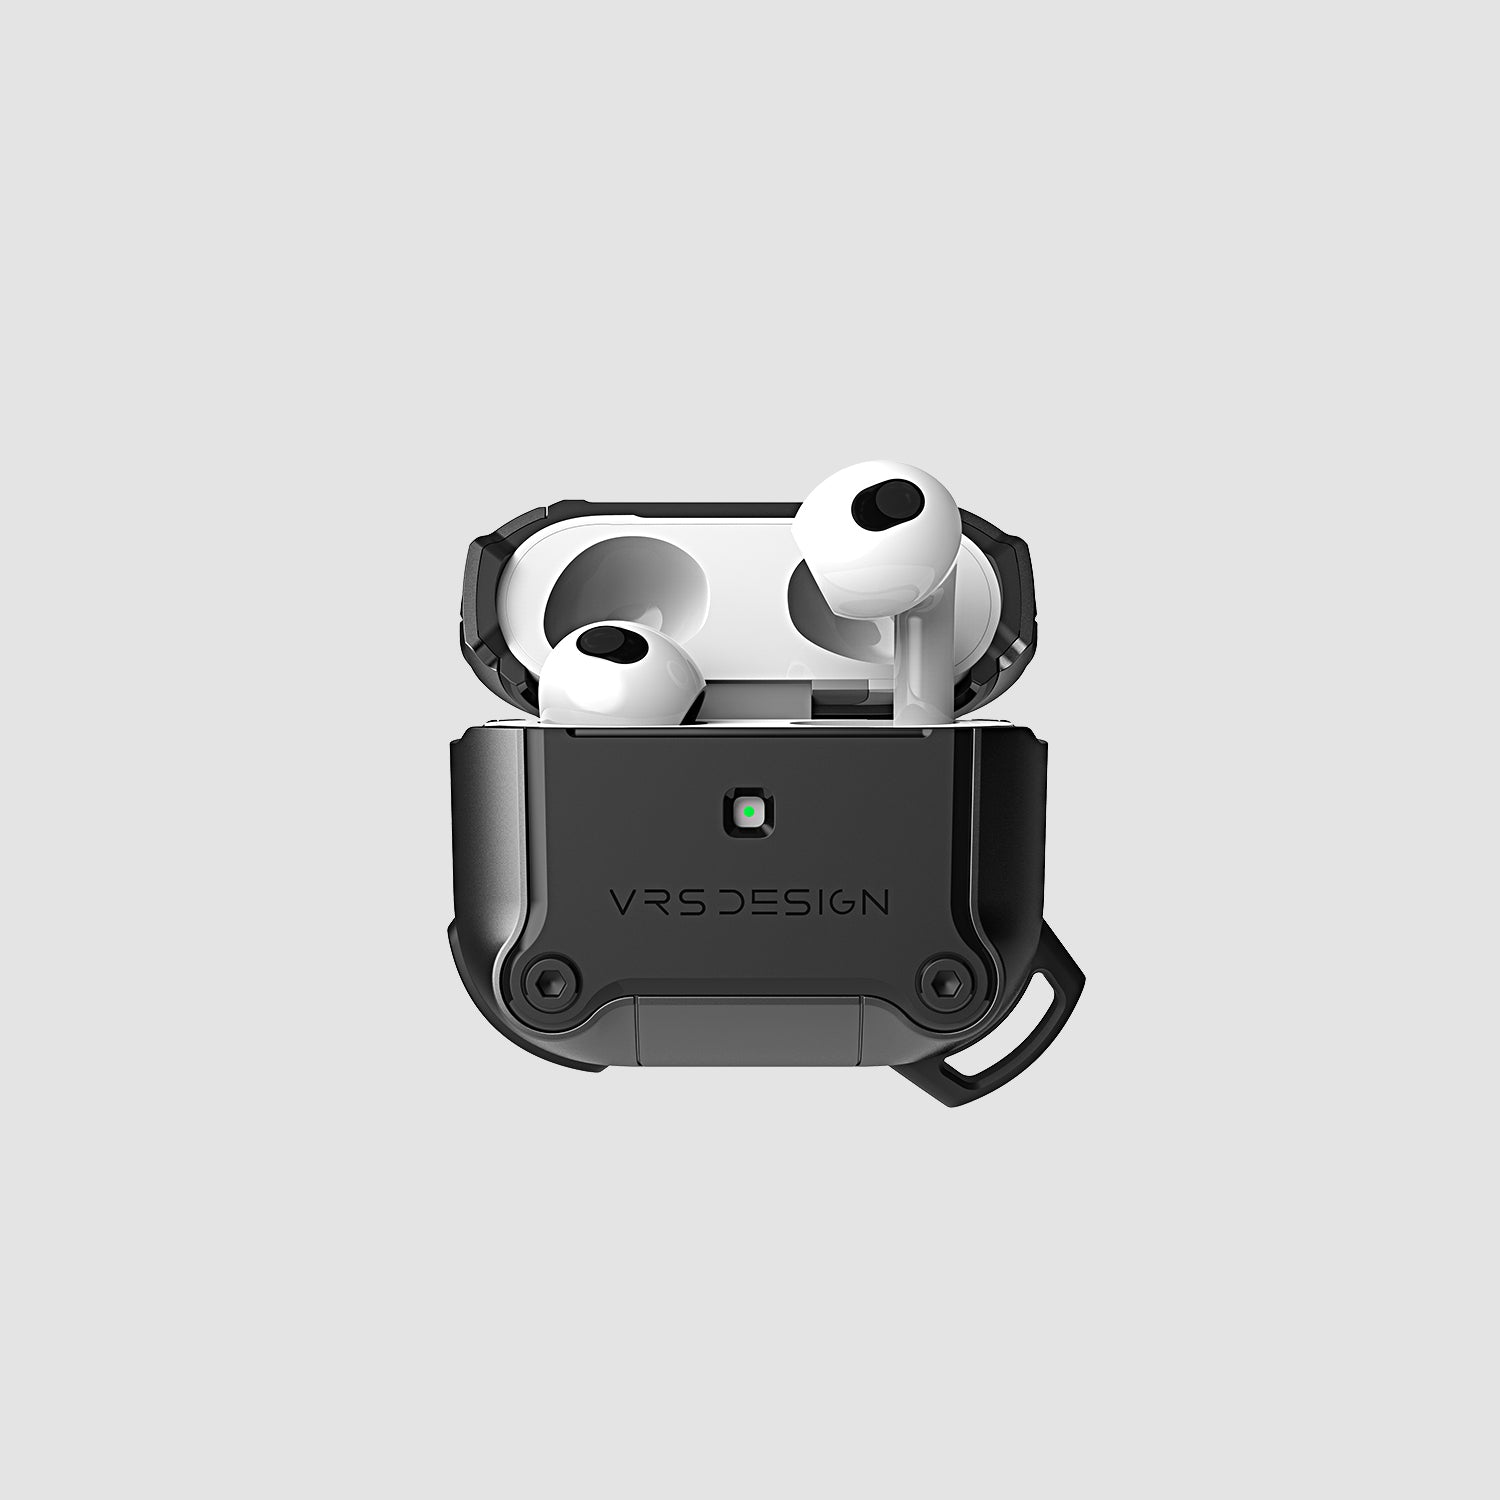 In ear Apple AirPods 3 Premium wireless earbuds Case with